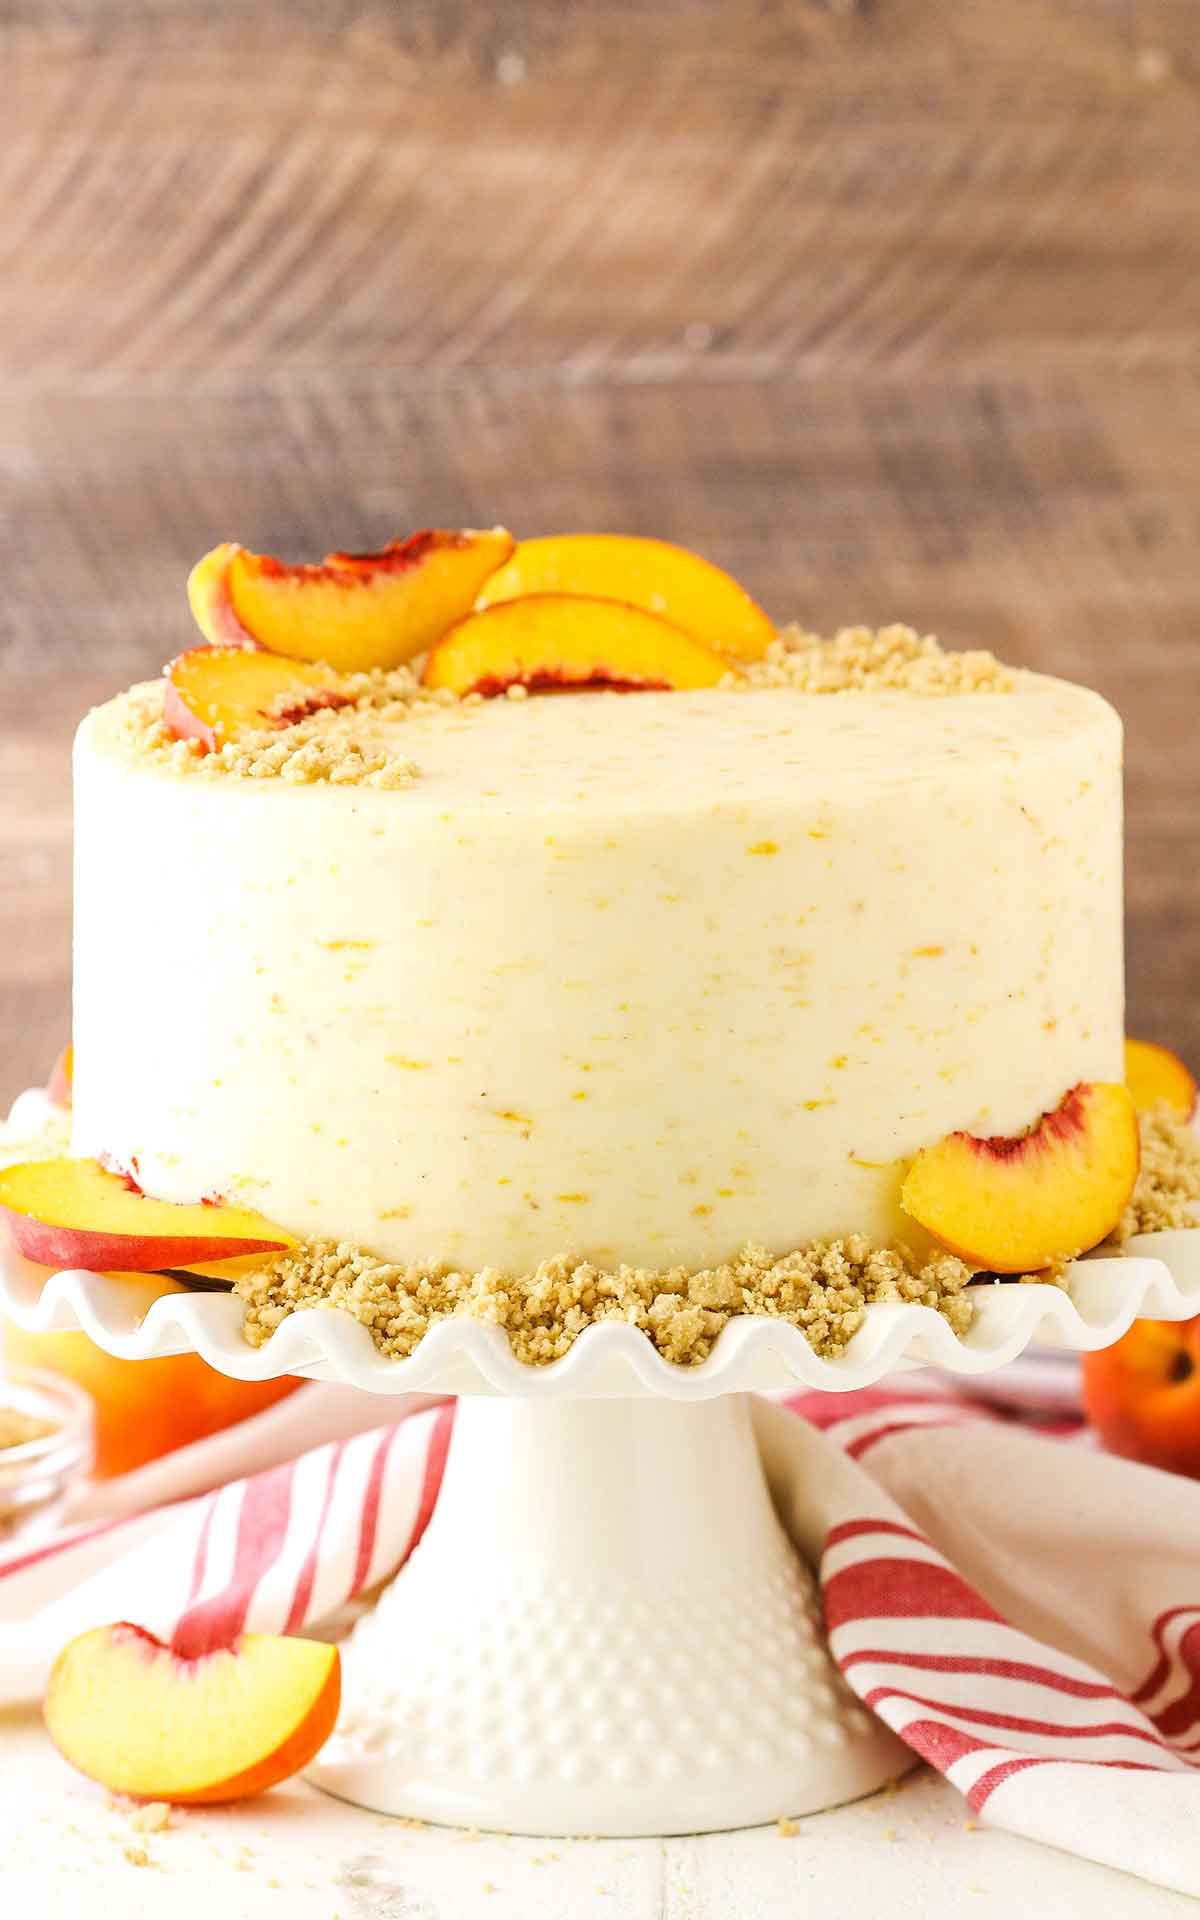 A full Brown Sugar Layer Cake With Peach Filling on a white cake stand